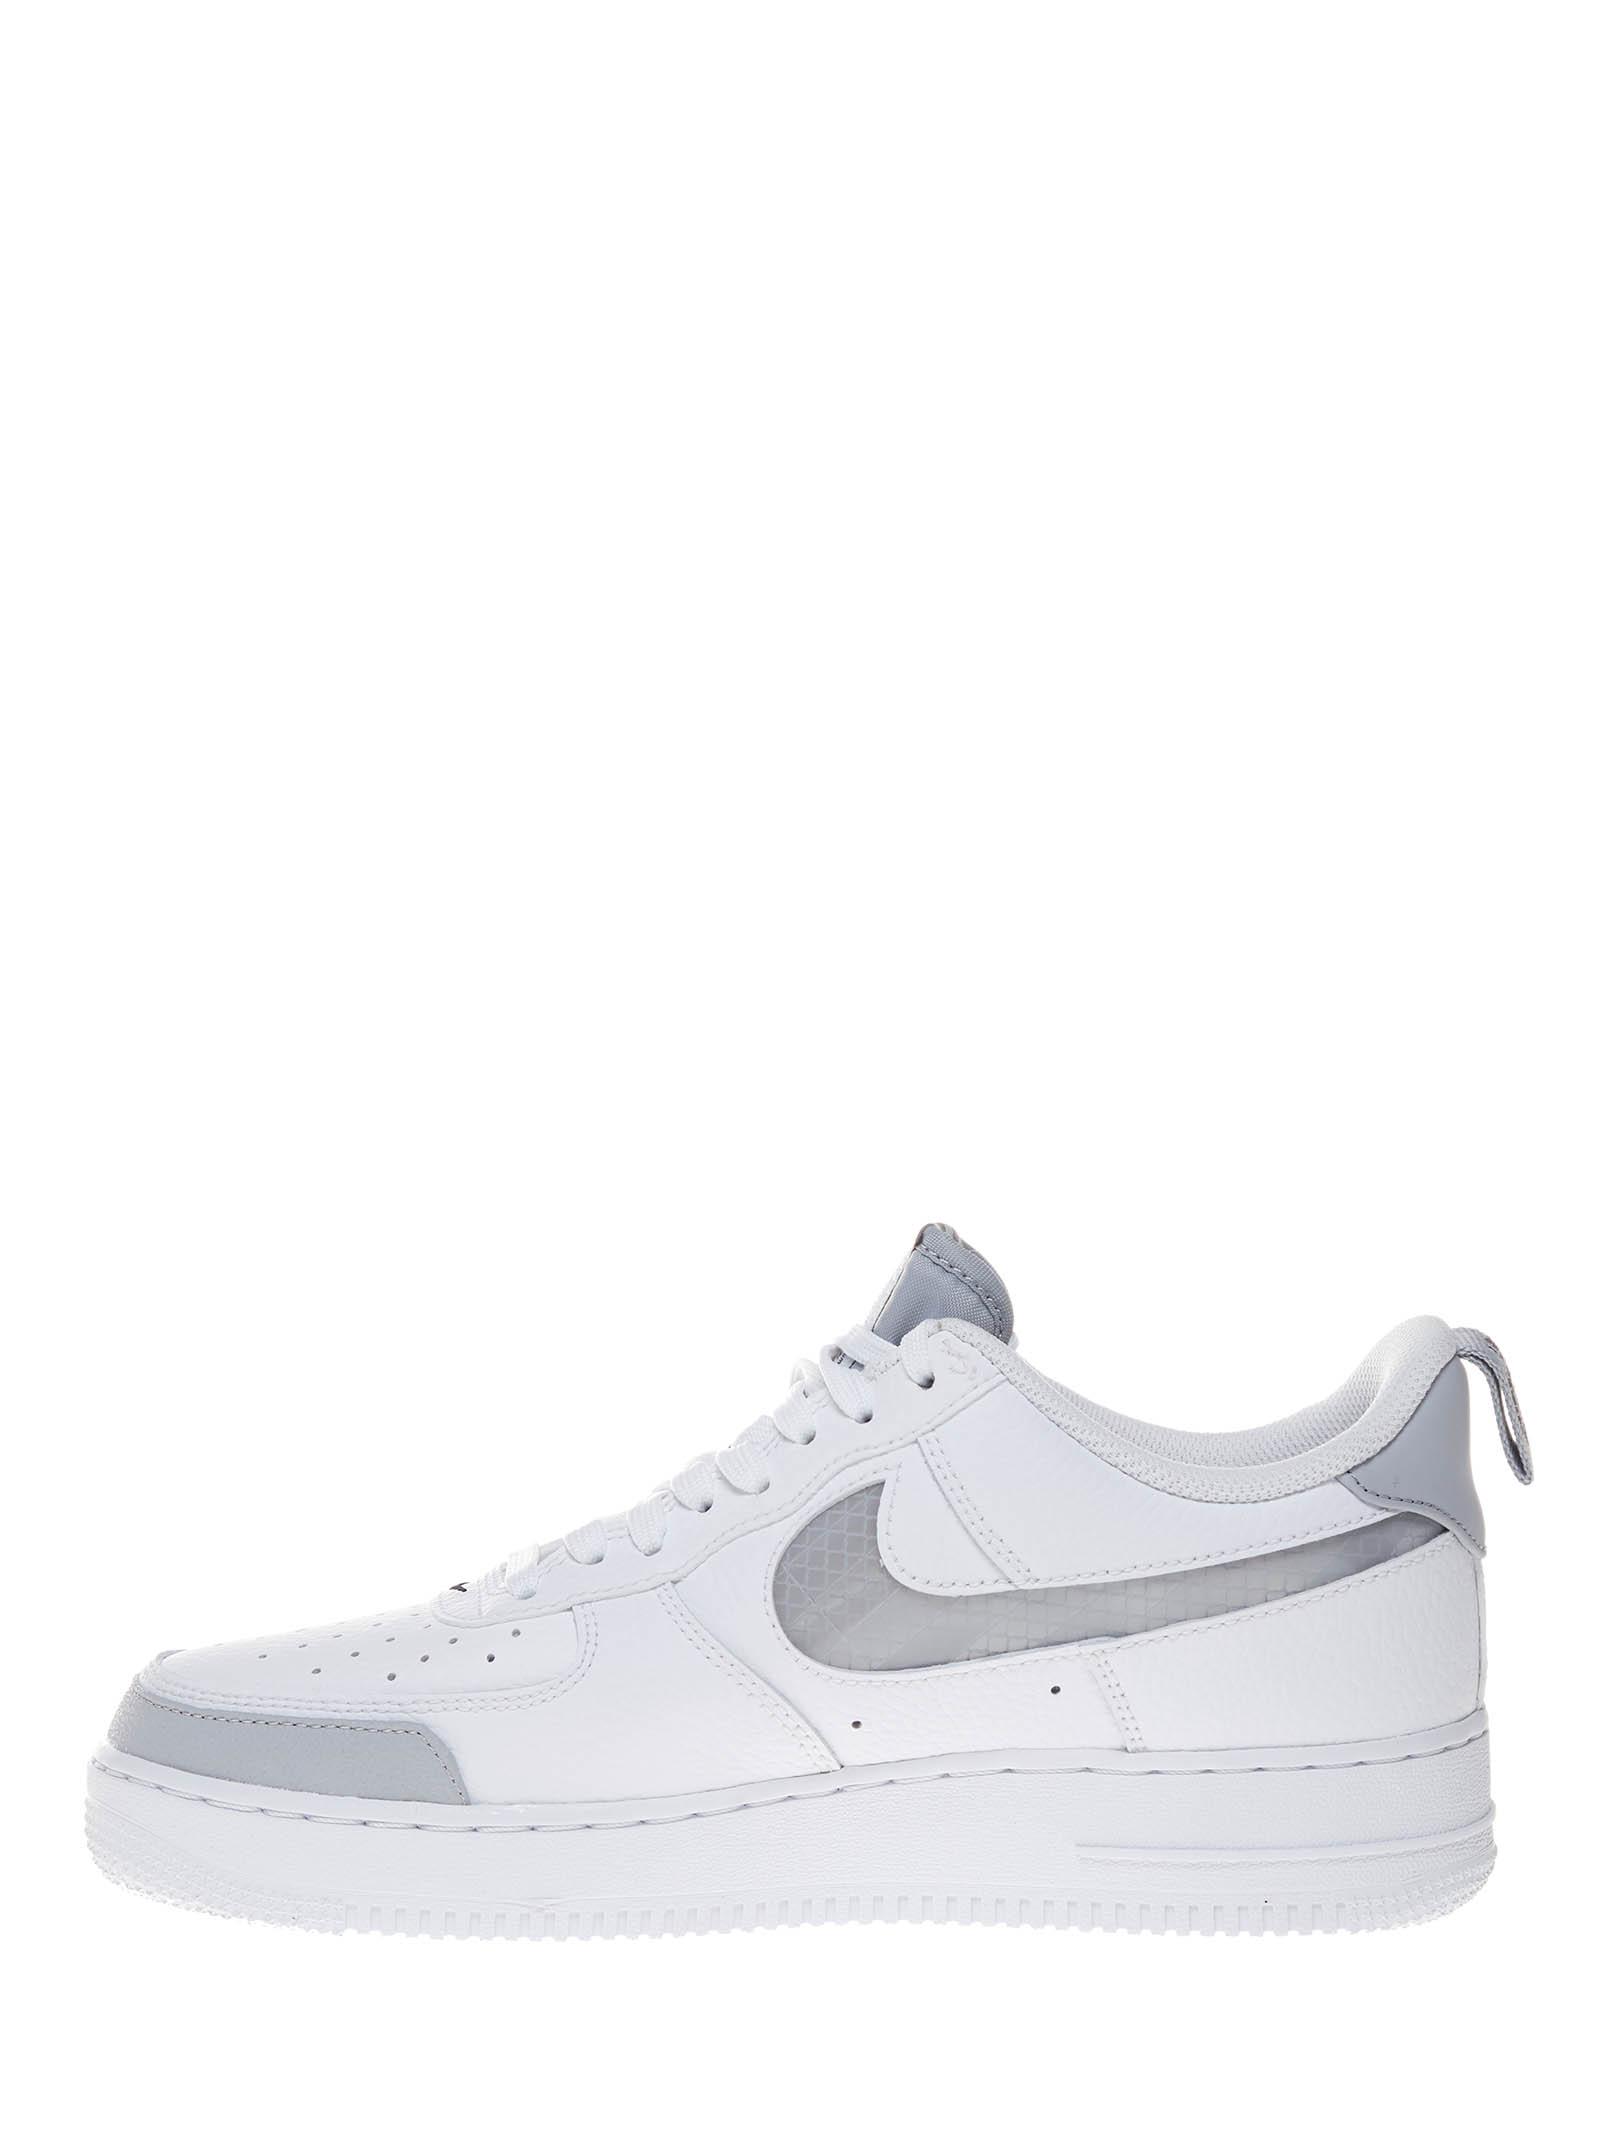 Nike White Air Force 1 '07 Lv8 Sneakers With Reflective Swoosh And Grey  Details. for Men | Lyst